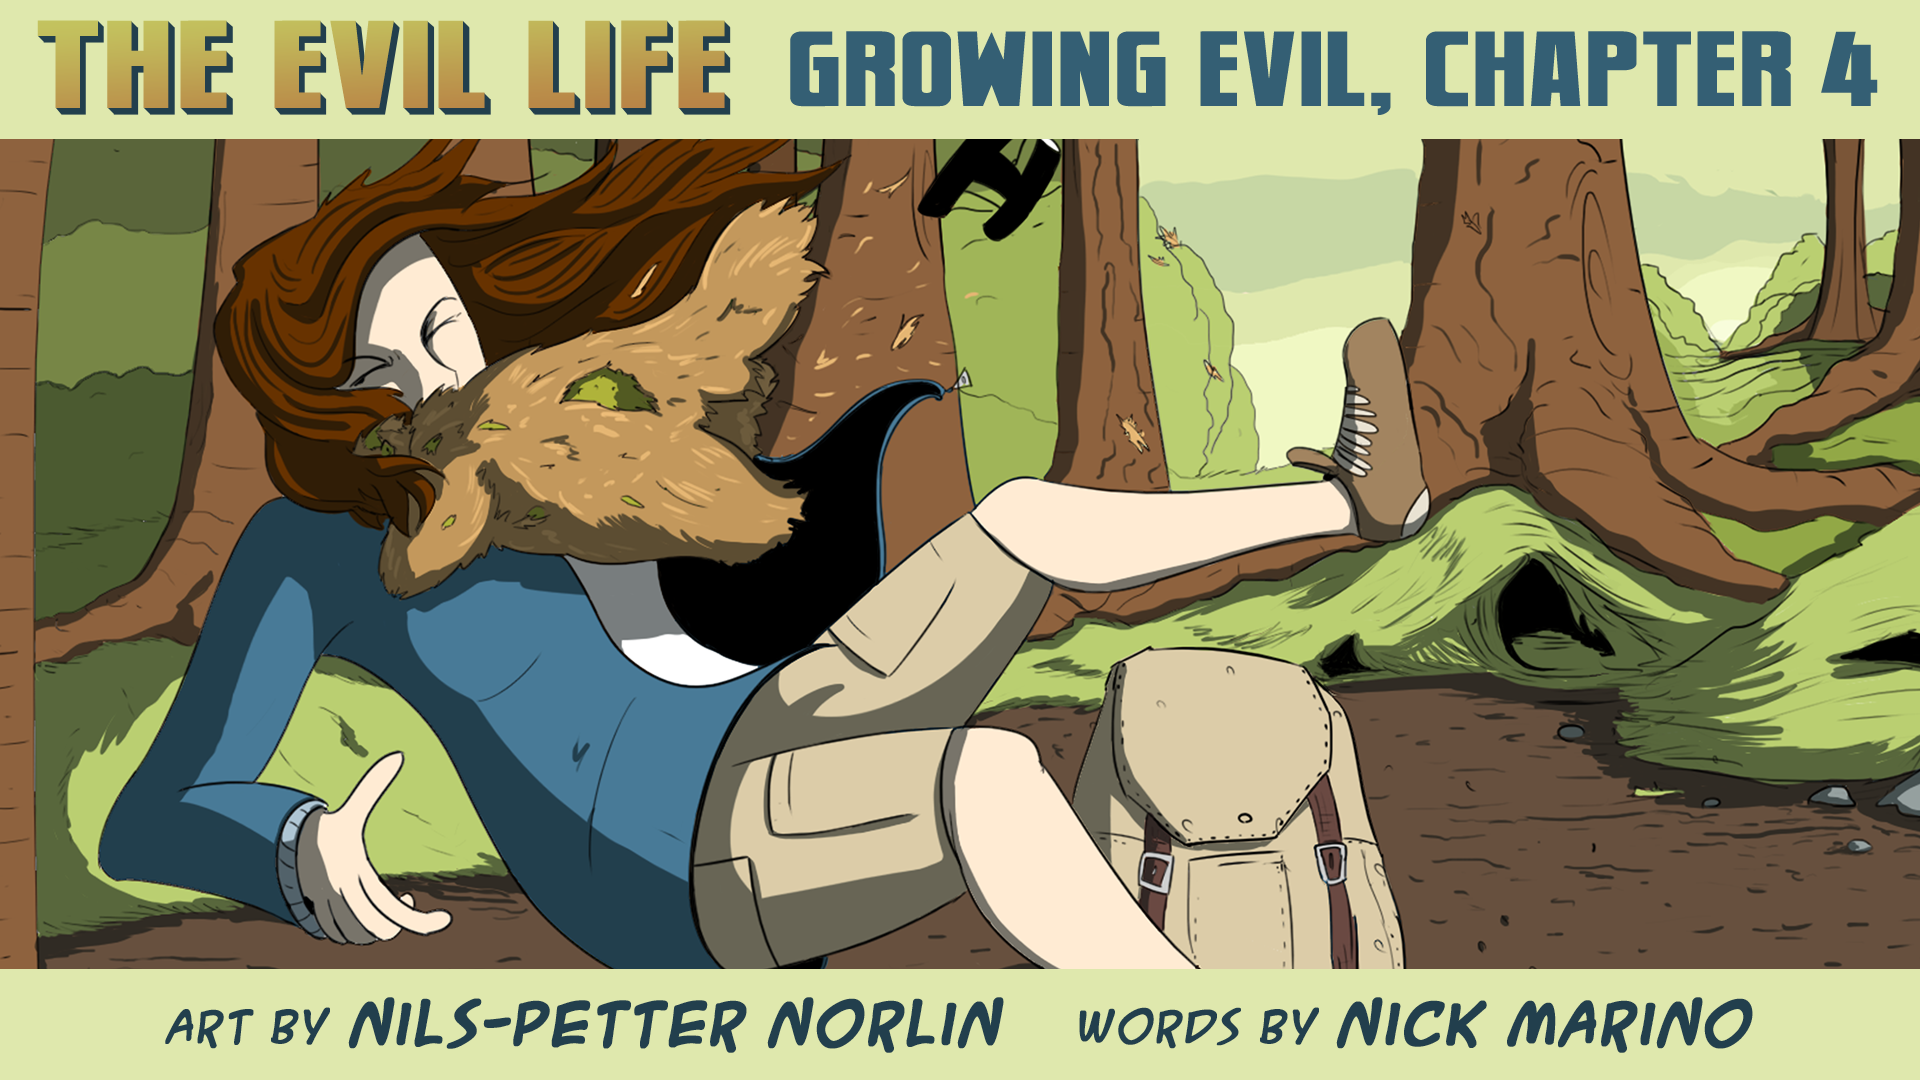 The Evil Life Webcomic, Chapter 4, Cover